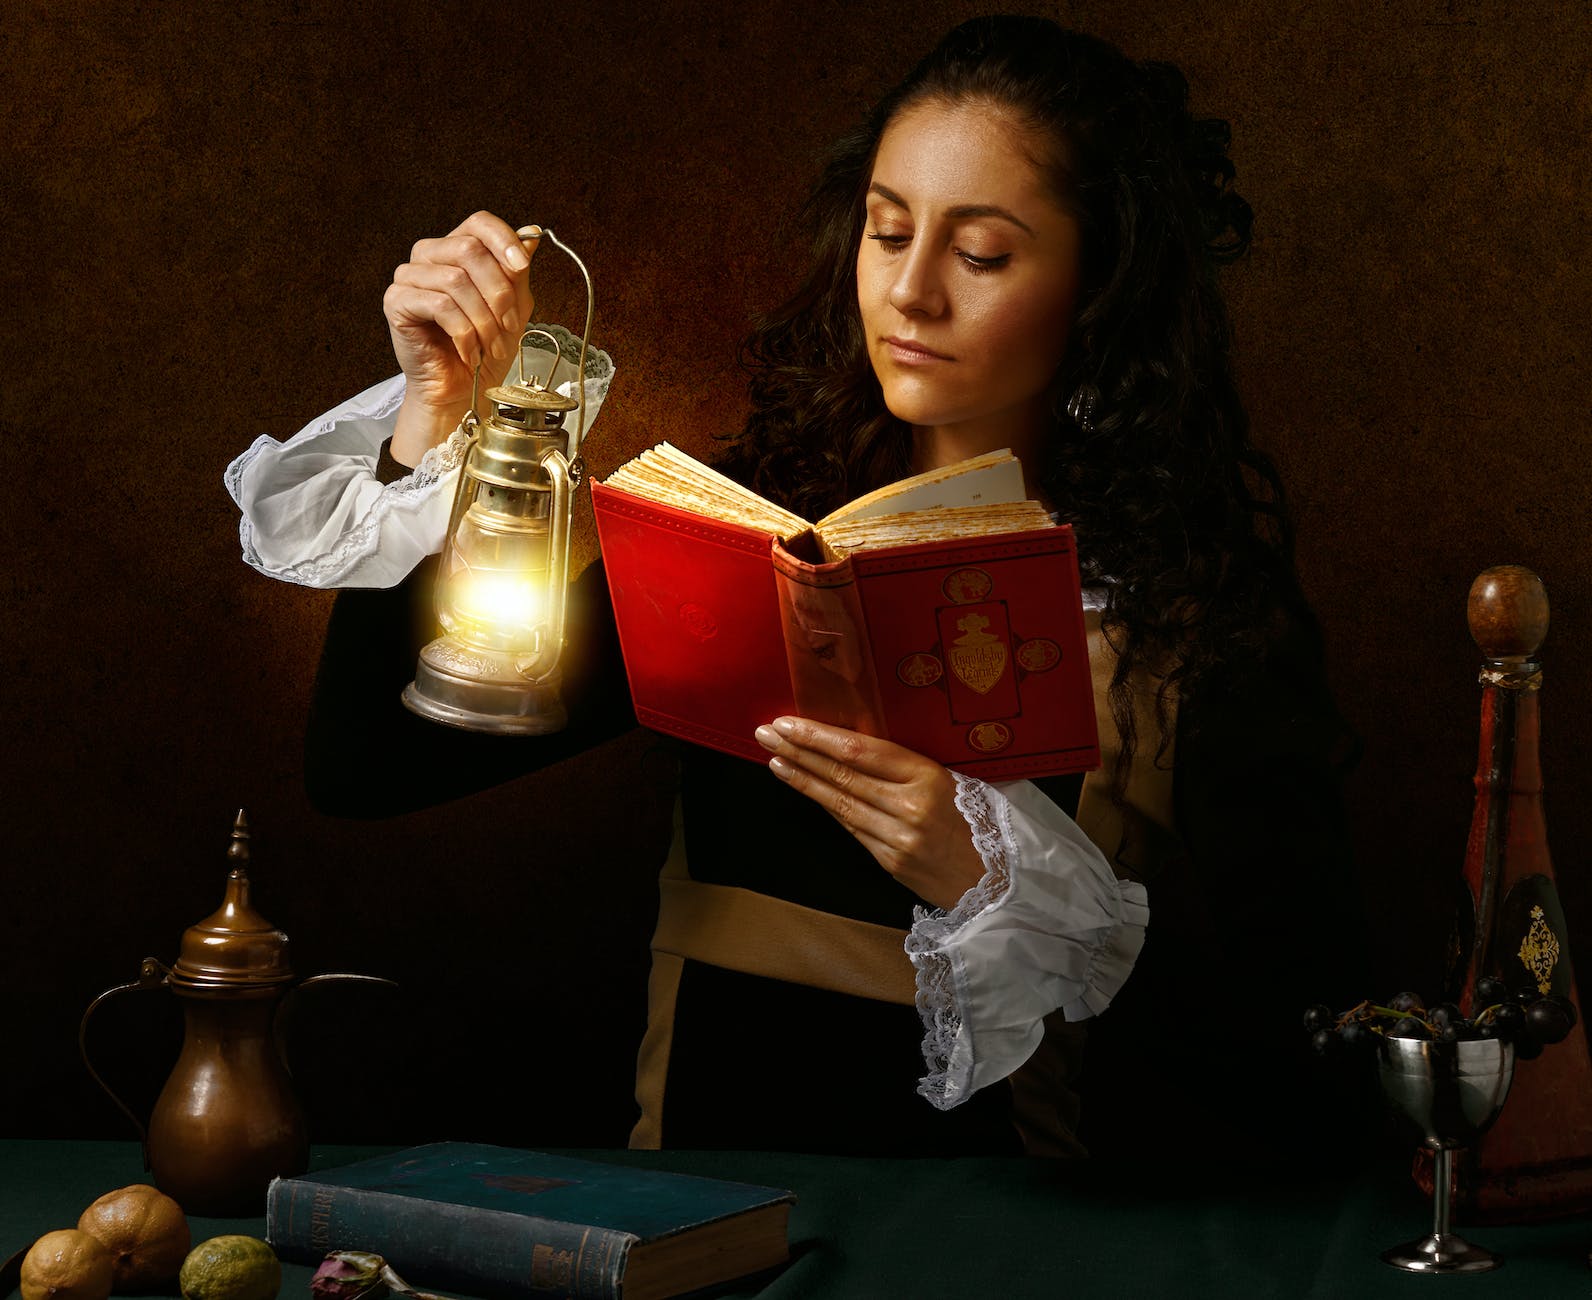 focused woman in old outfit reading book with oil lamp